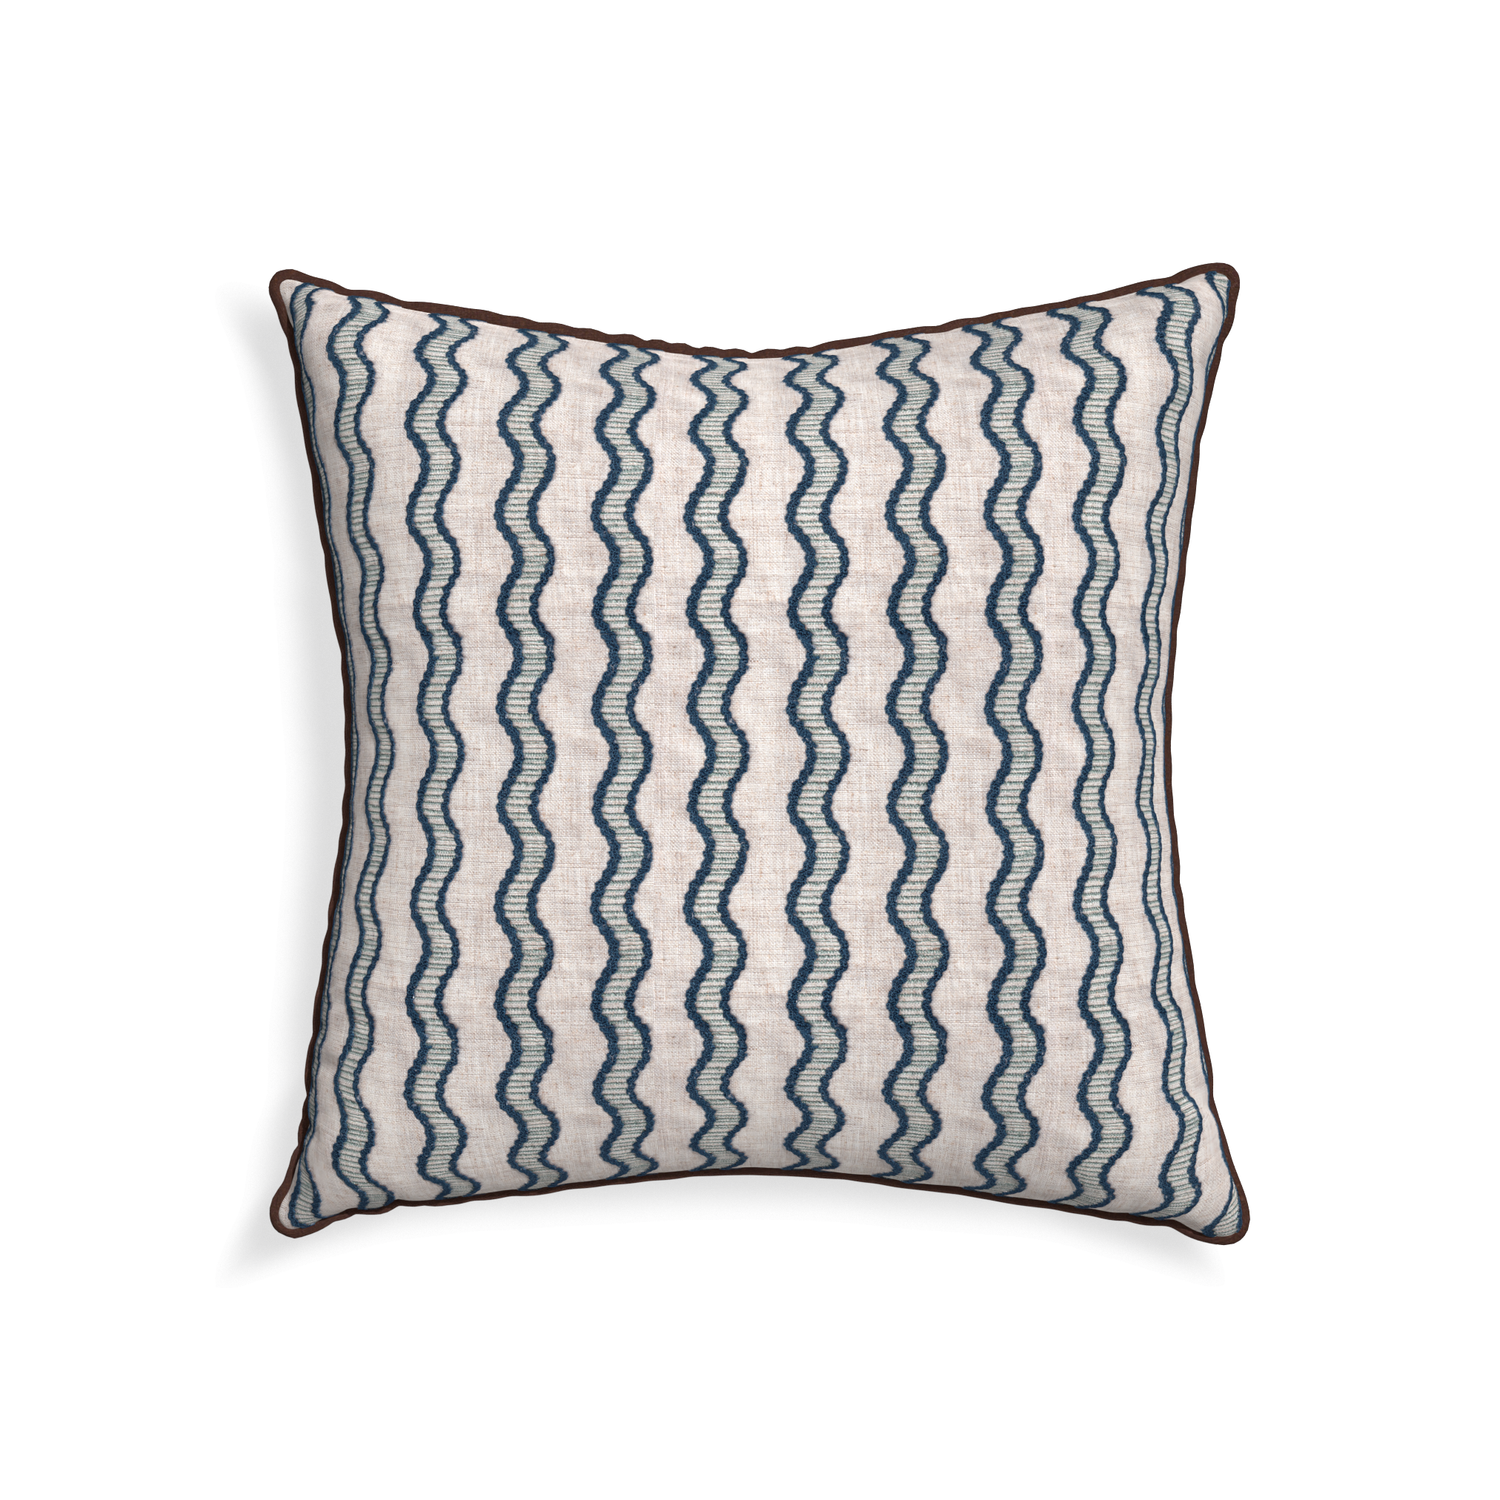 22-square beatrice custom embroidered wavepillow with w piping on white background